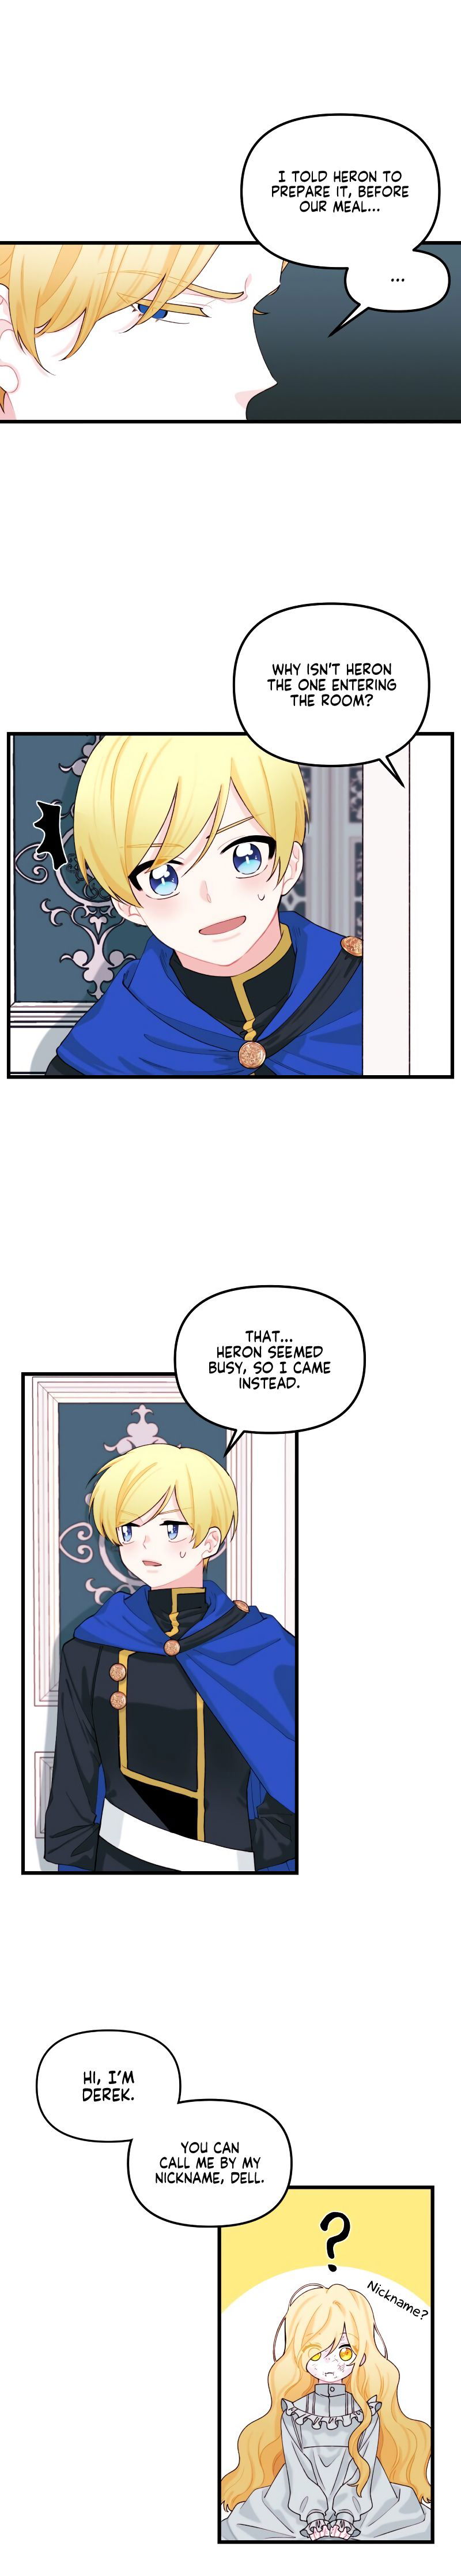 the-princess-in-the-dumpster-chap-8-13